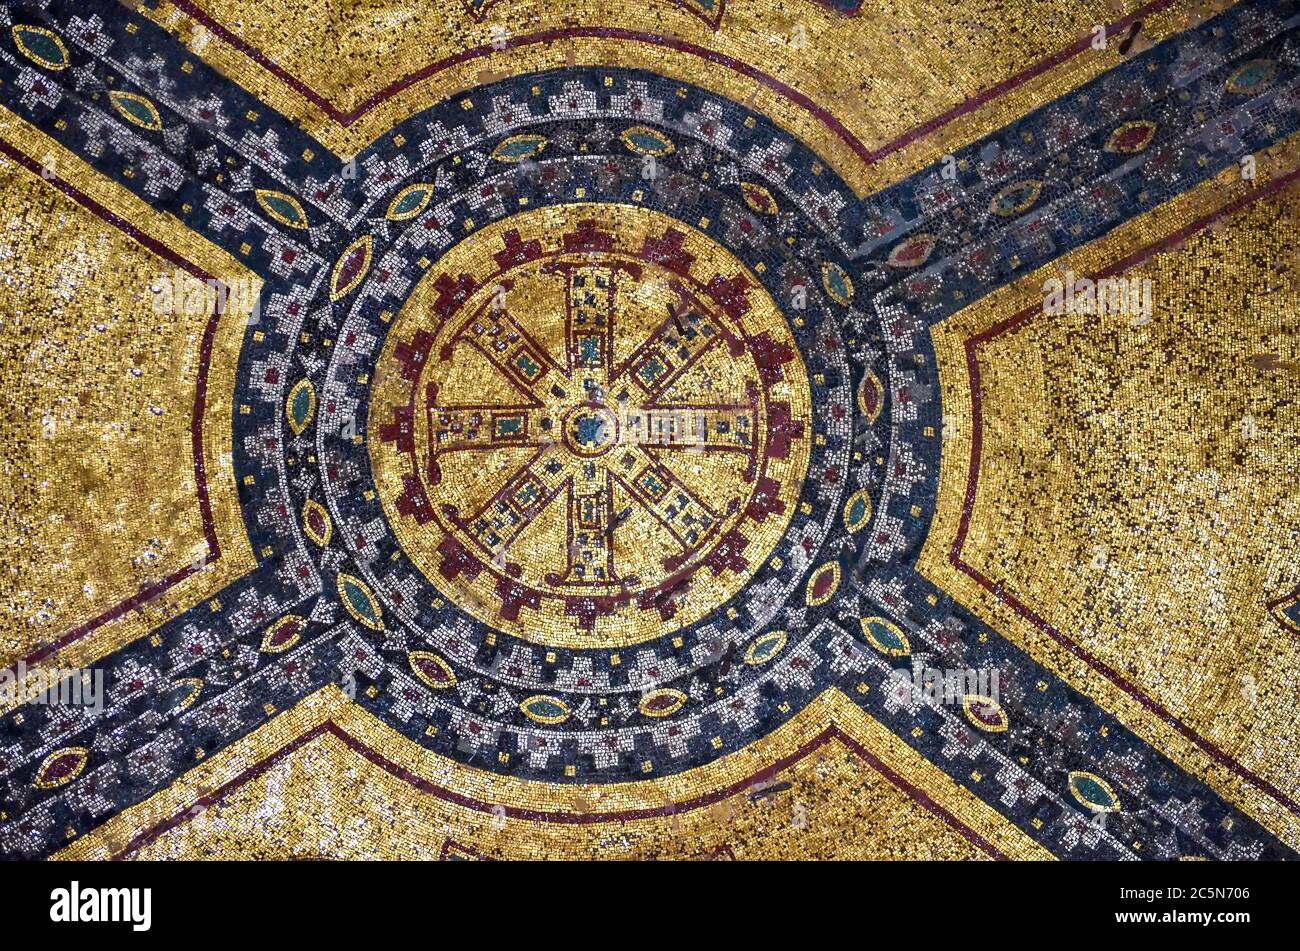 Istanbul, Turkey, September 19, 2018. Fragment of an ancient Byzantine mosaic in the Hagia Sophia Stock Photo